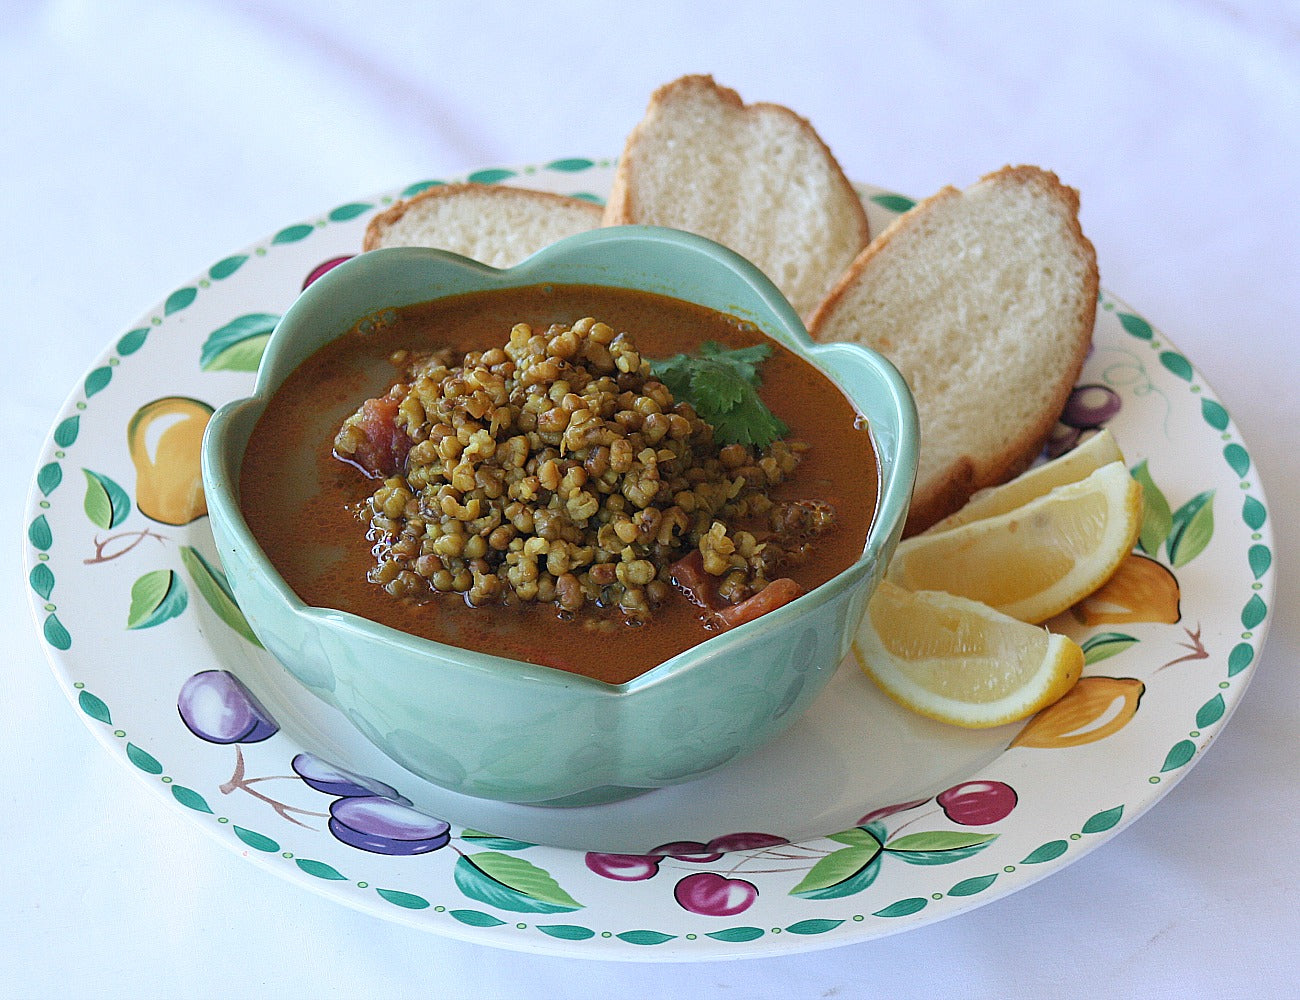 green moong dhal served with fresh crusty bread and lemon wedges